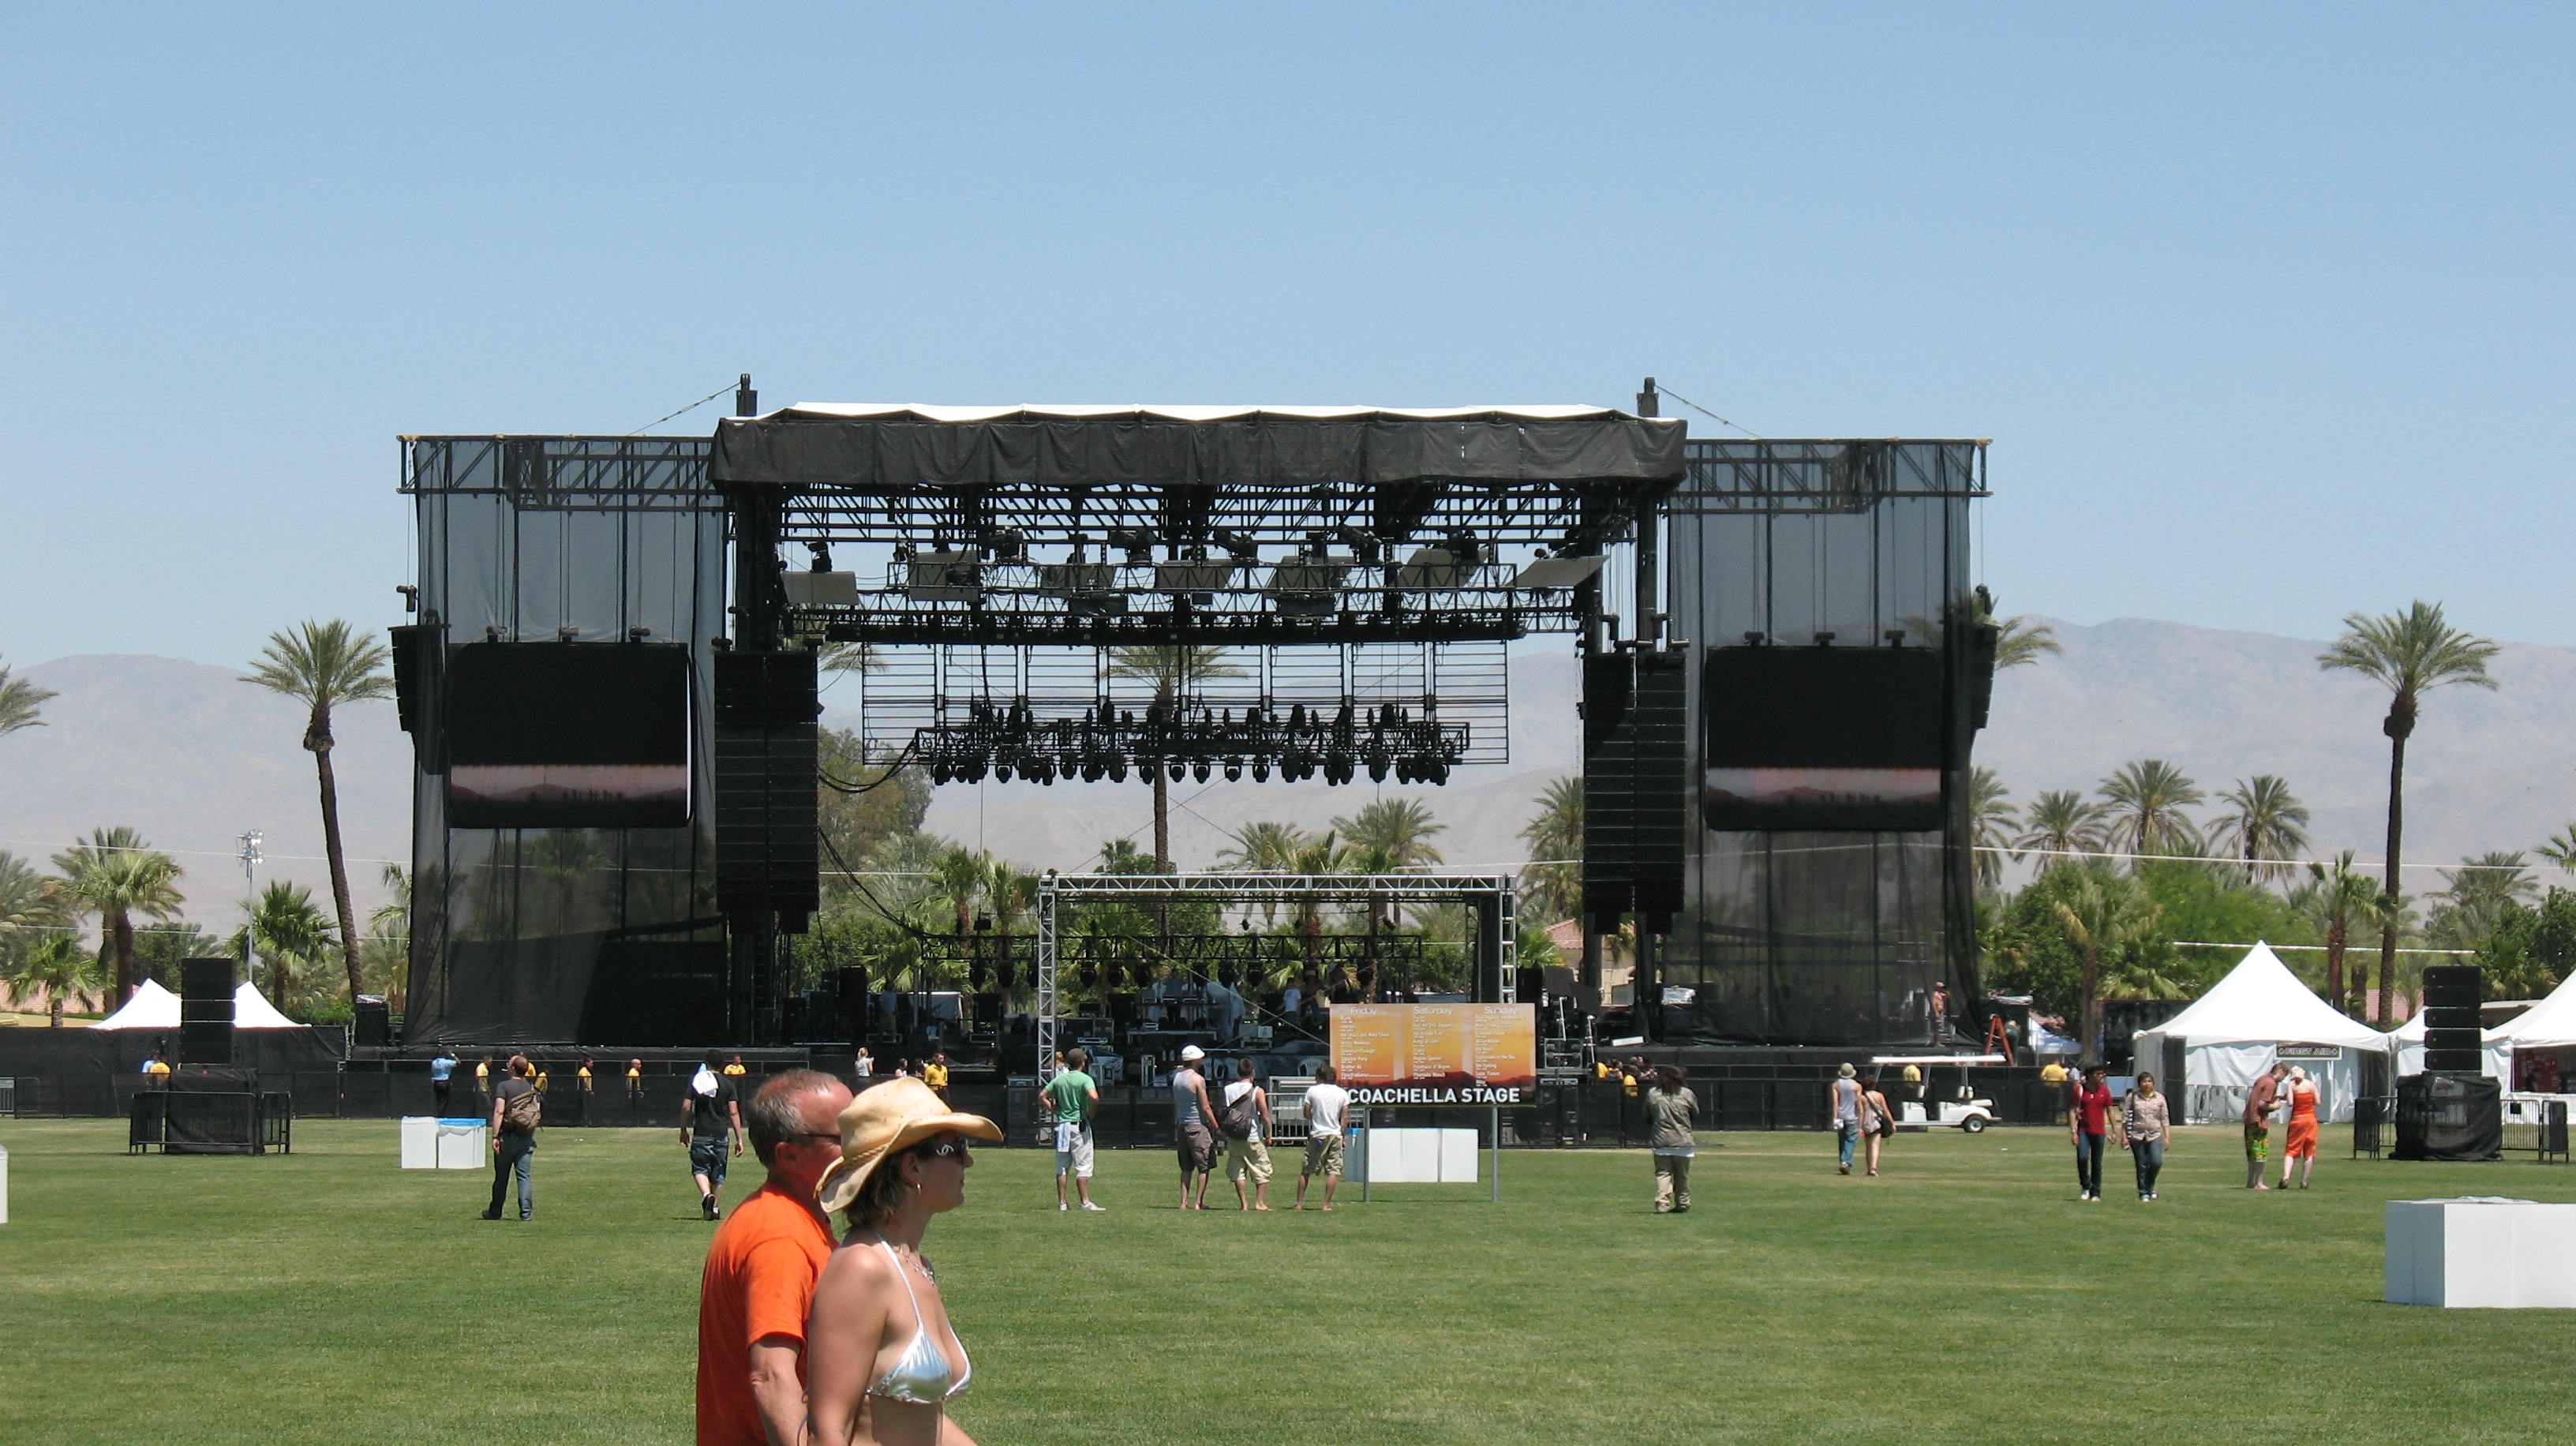 Coachella Security Guards Say They Are Underfed, Underpaid And Mistreated